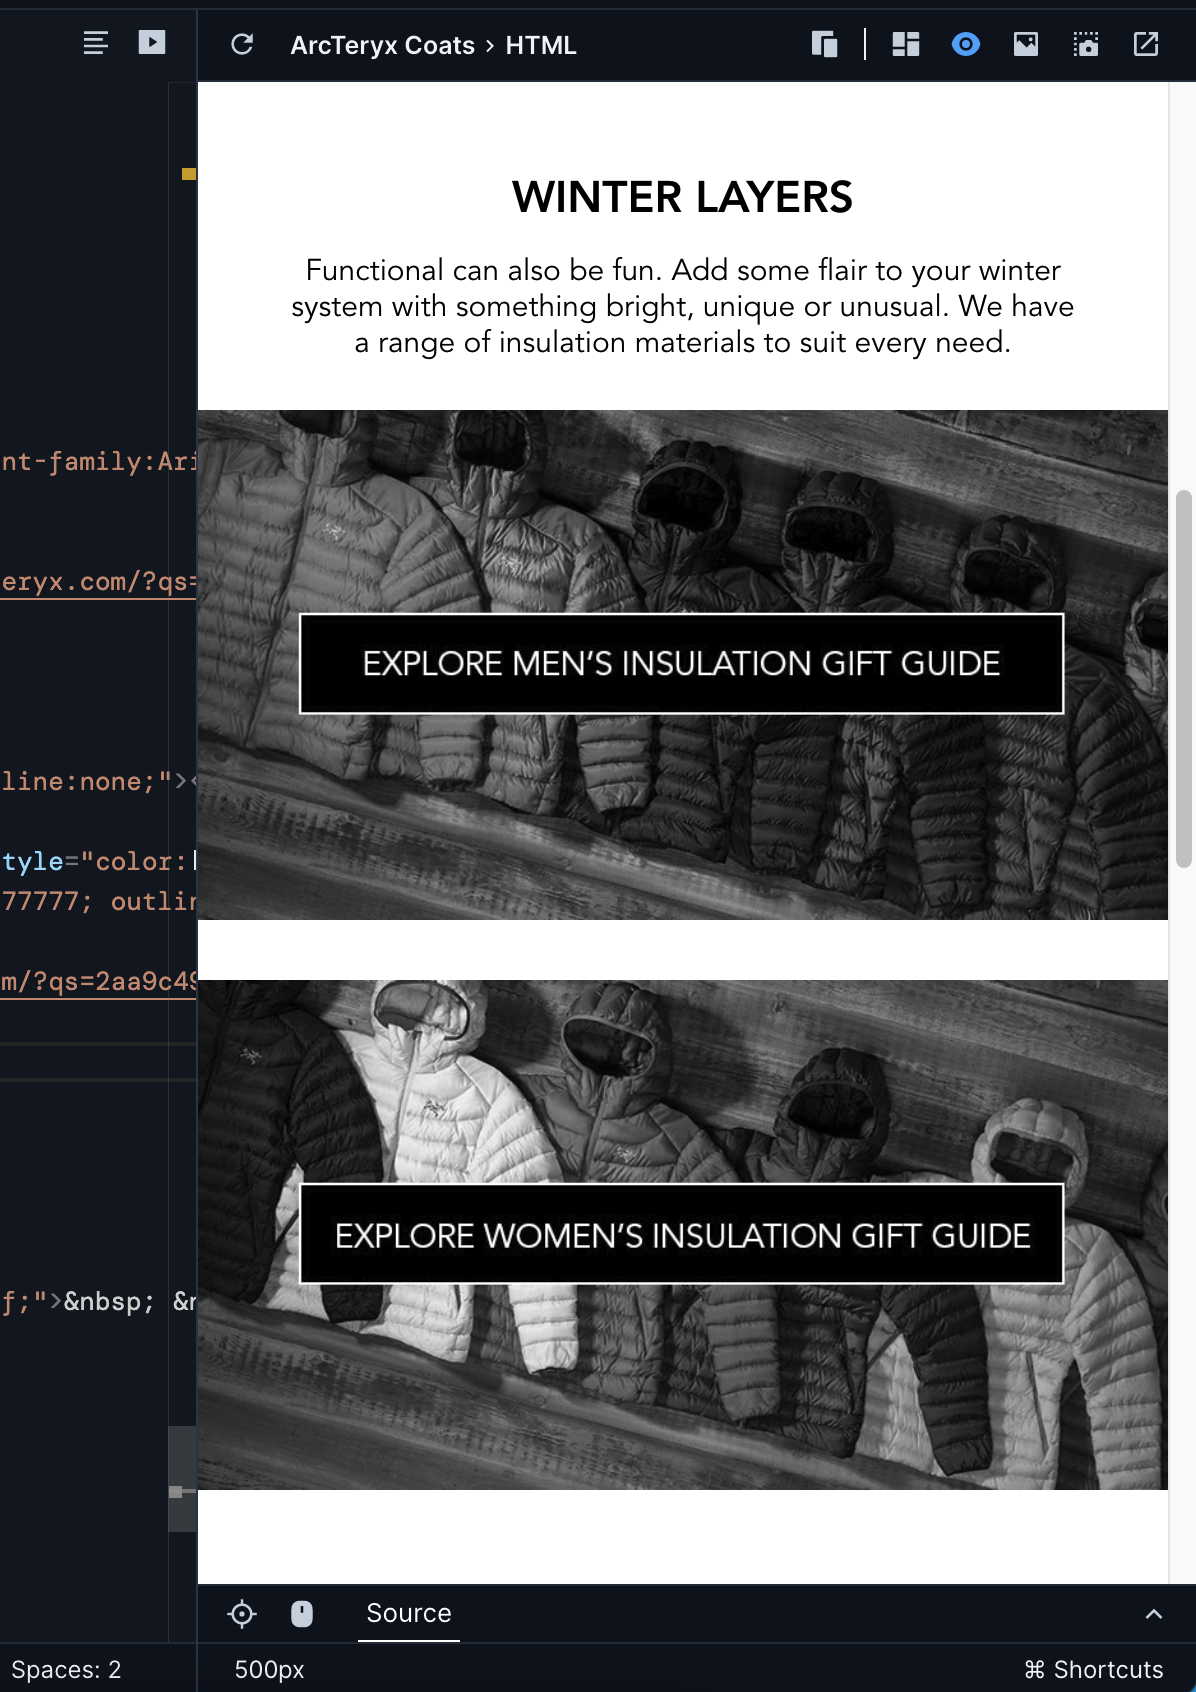 Up close image of the Preview, showing the same email advertising winter jackets. The jackets in the both images now appear only in various shades of gray.